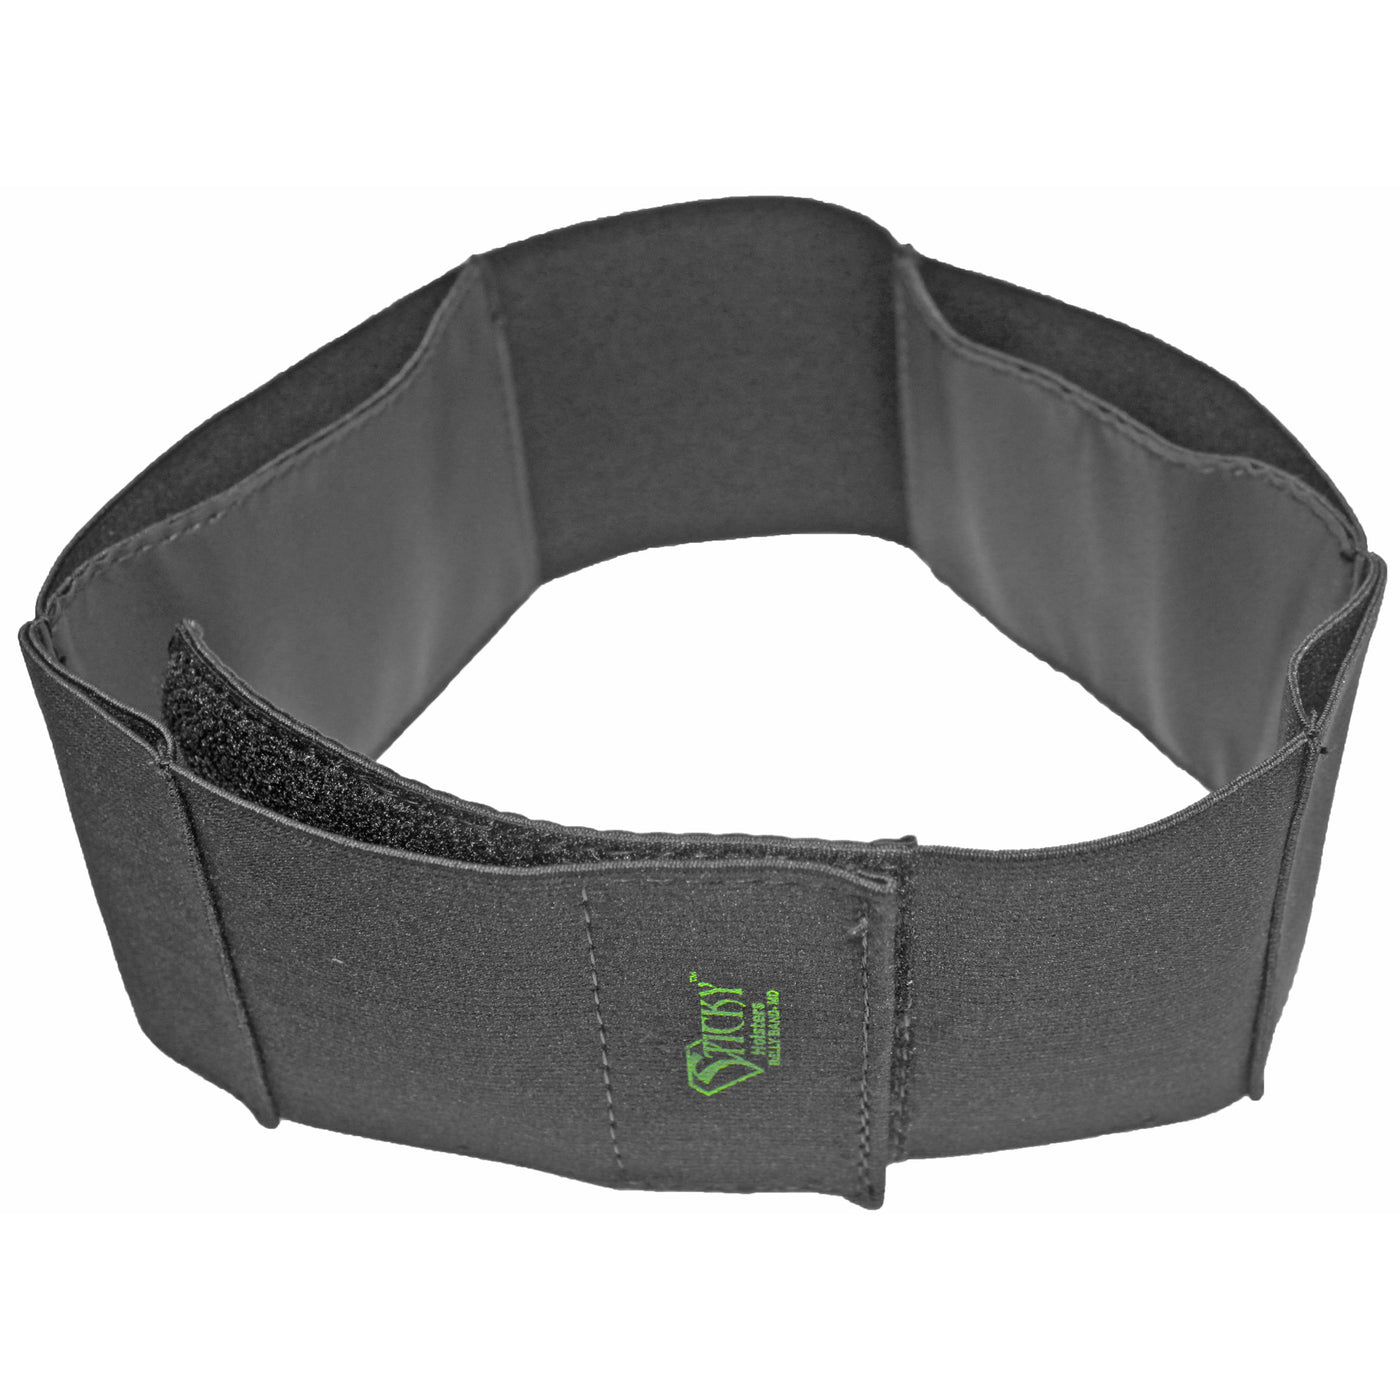 Sticky Holsters Sticky Belly Band Large 32-50 In.